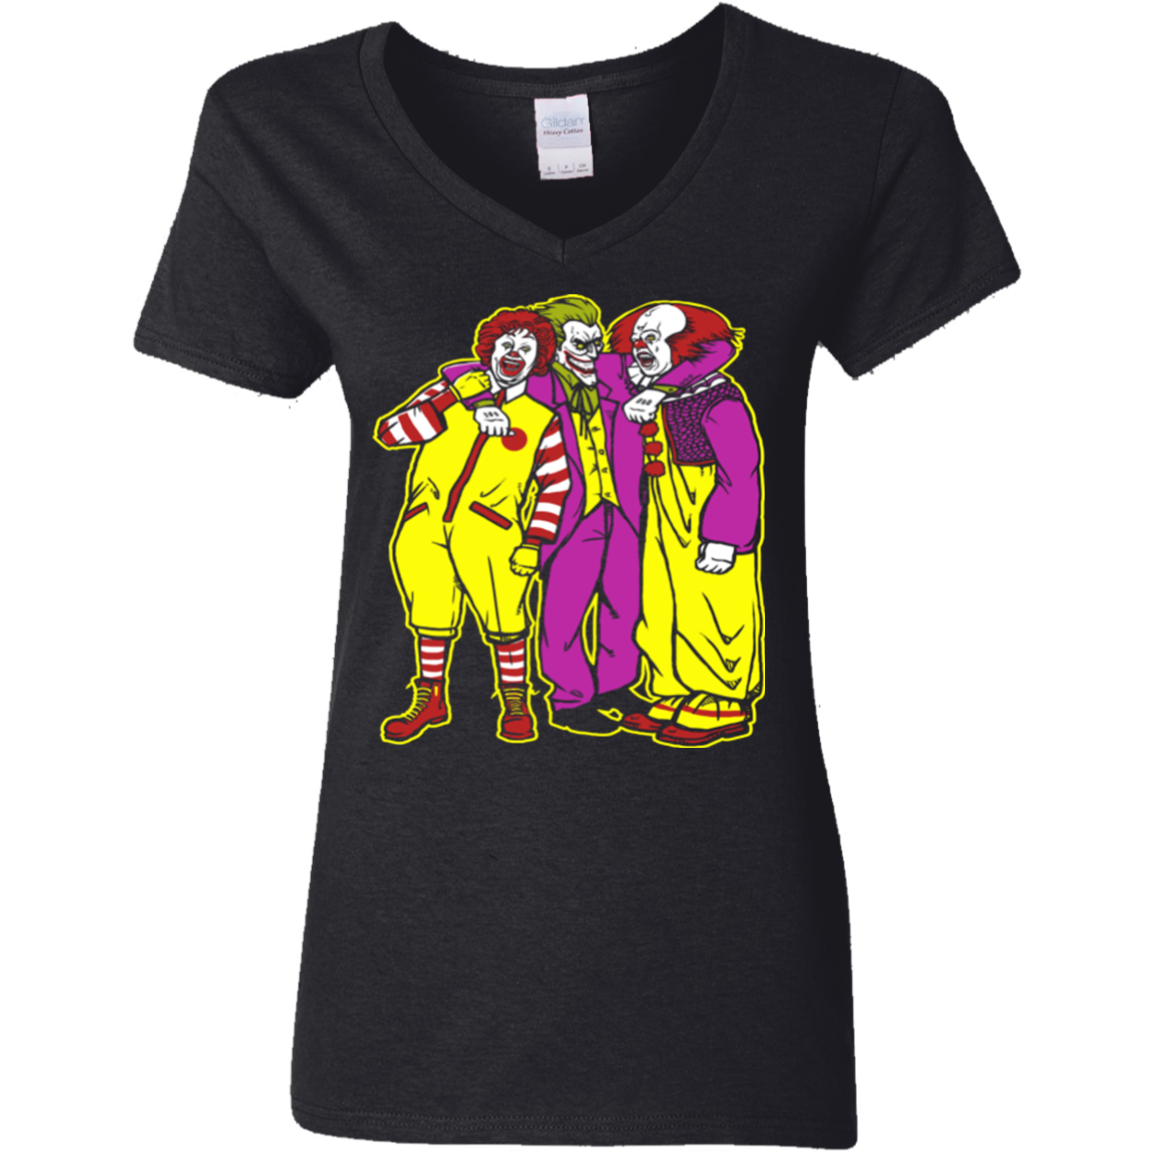 Whos Laughing Now Women's V-Neck T-Shirt